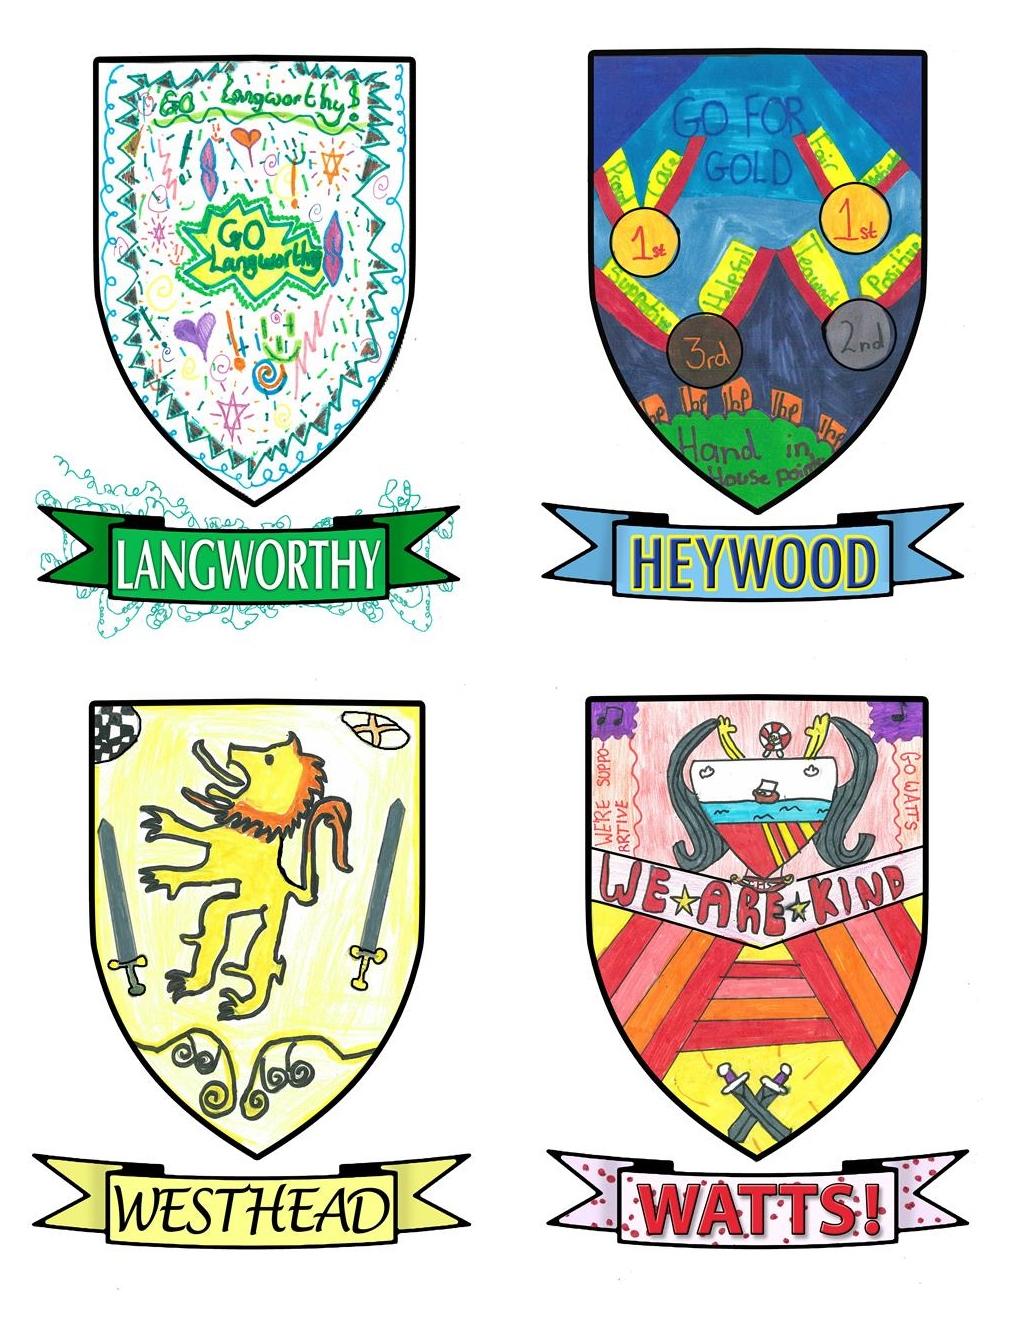 four colourful shields designed by student pupils for cheadle hulme school juniors' house teams Westhead, Watts, Langworthy and Heywood as part of an art competition to design a house coat of arms